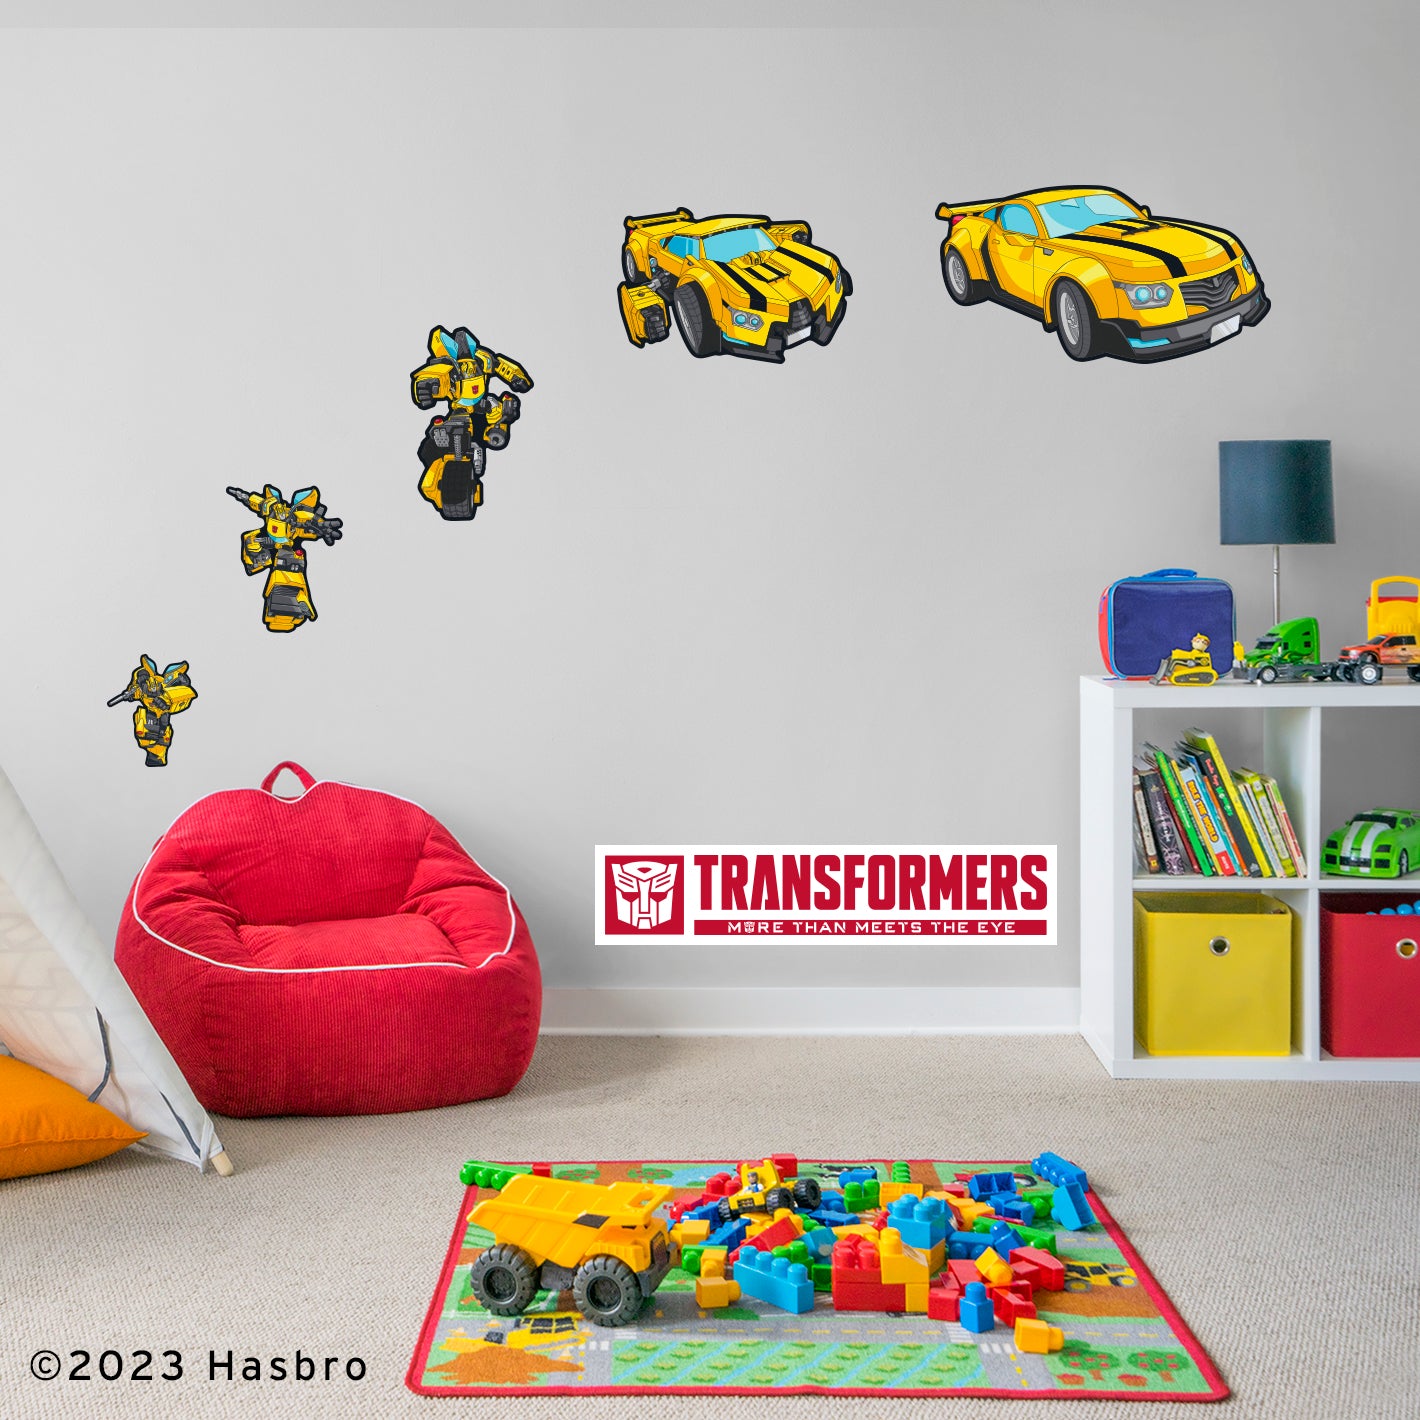 Transformers: Bumblebee Transforming Sequence Collection        - Officially Licensed Hasbro Removable     Adhesive Decal